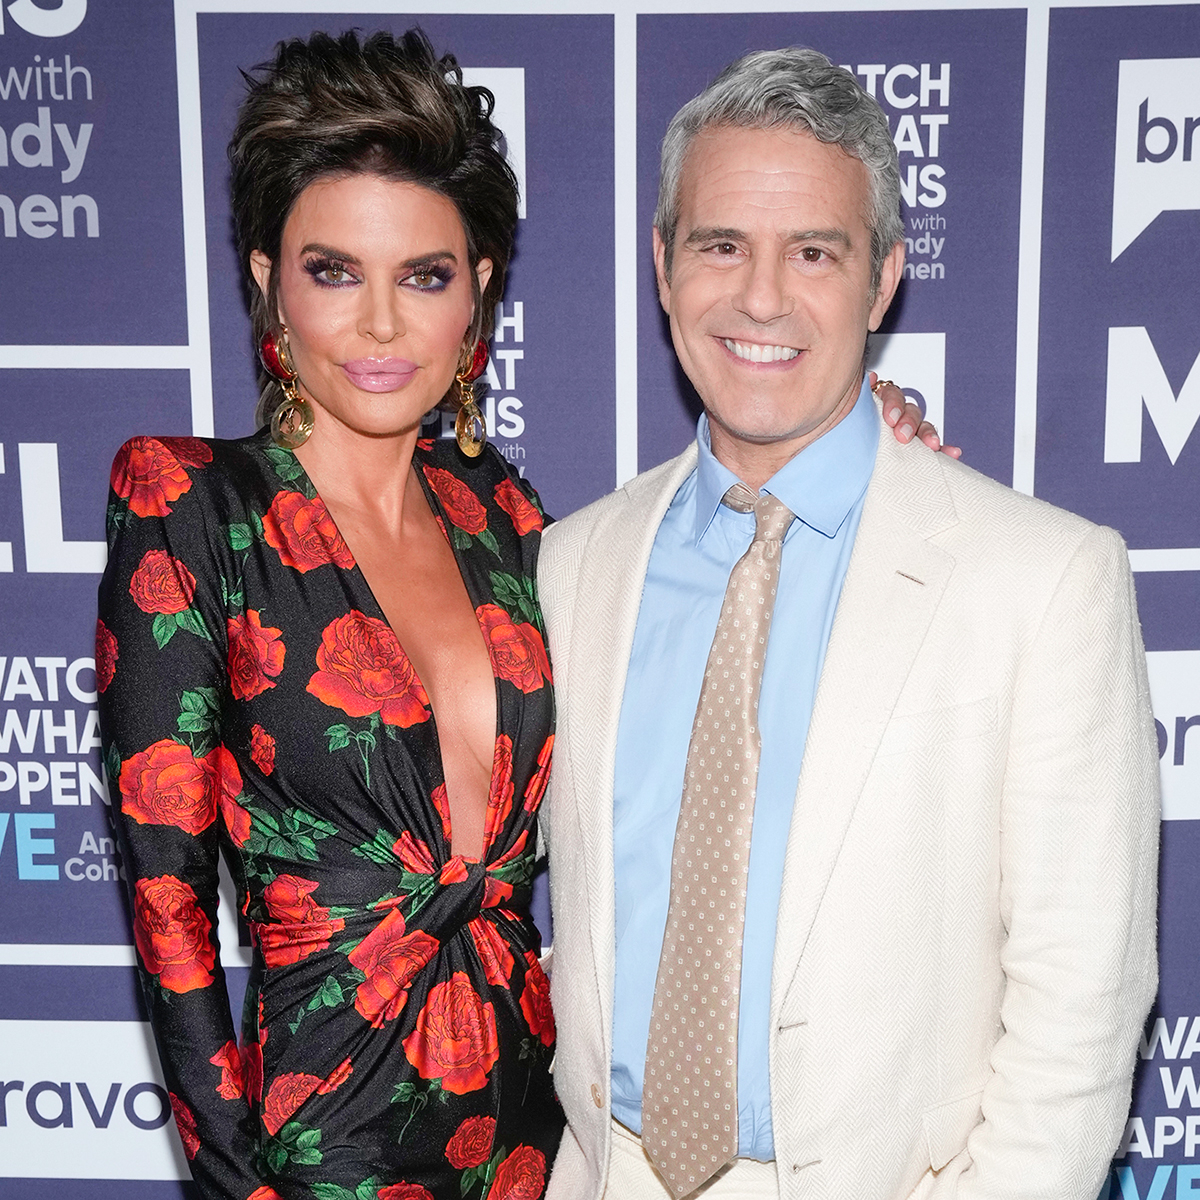 Lisa Rinna Reacts to Andy Cohen’s Claims About Her RHOBH Exit